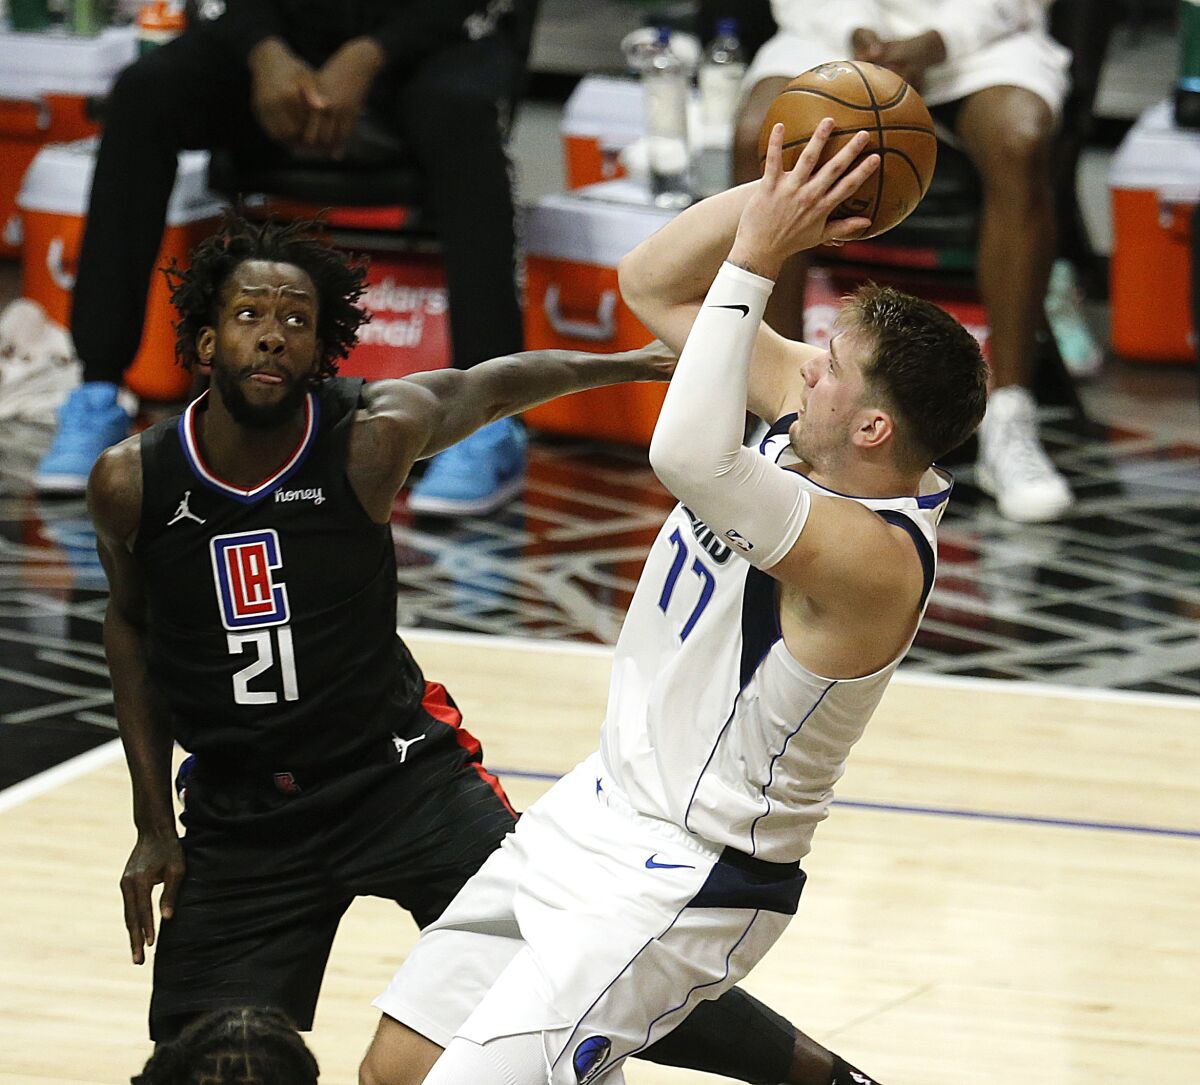 Dallas guard Luka Doncic takes a fallback shot while defended by Clippers' Patrick Beverley.